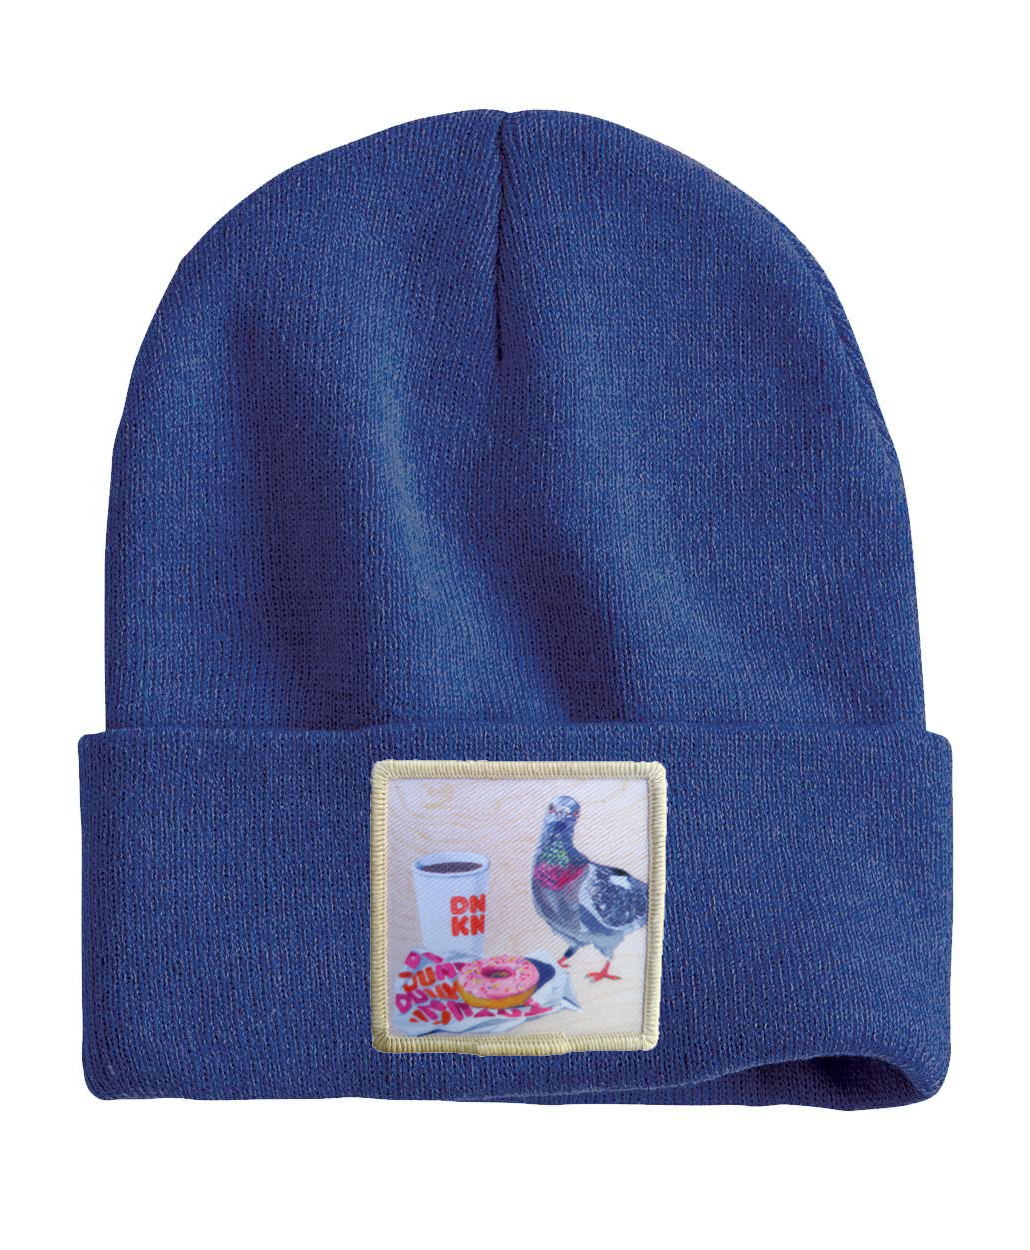 Pigeons Run on Donuts Beanie Hats Flyn Costello Heather Blue  